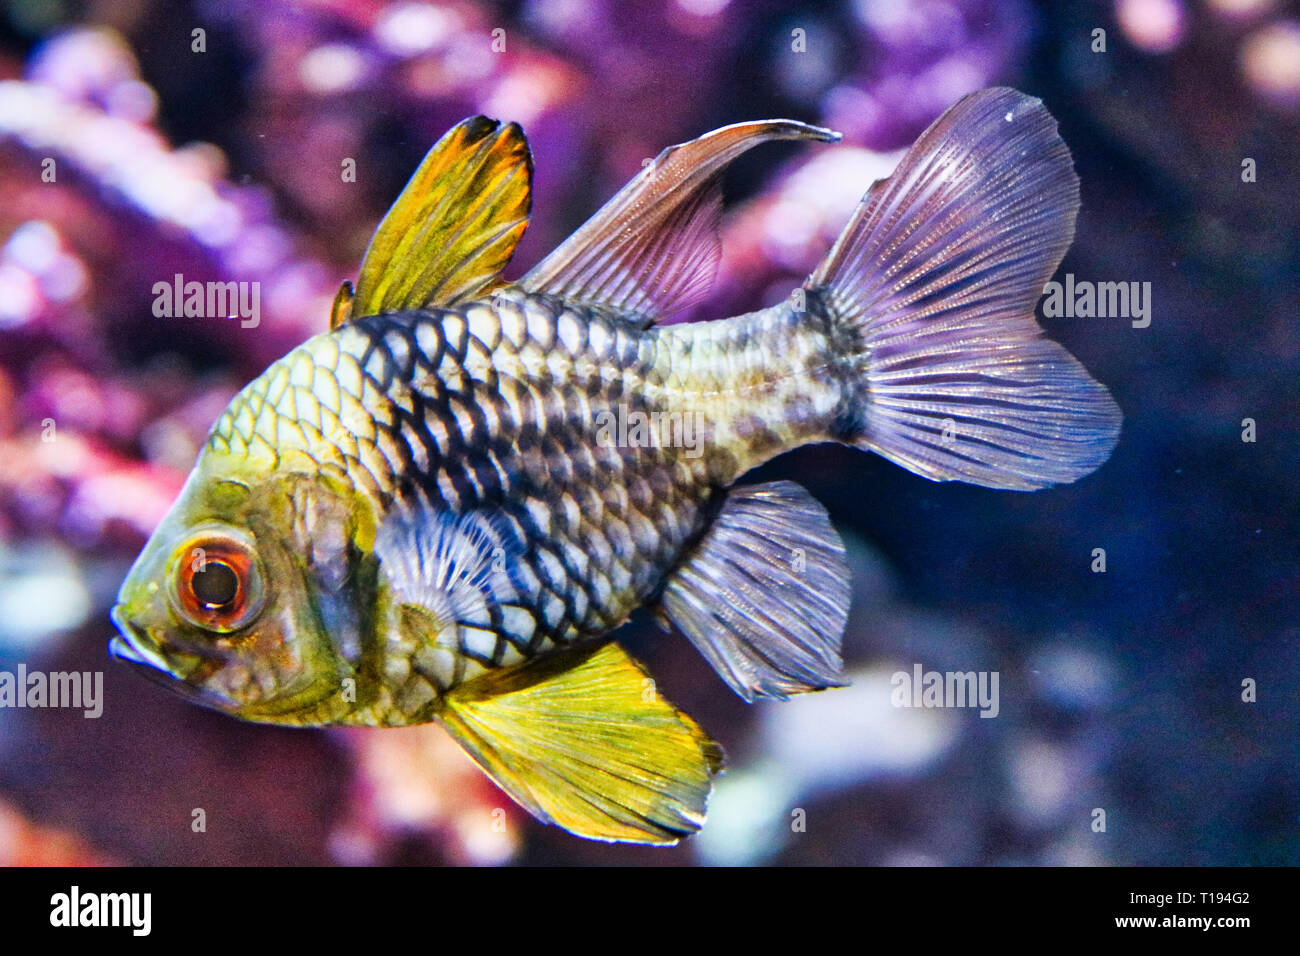 This unique picture shows an exotic fish. This photo was taken at Sea Life in Bangkok Thailand Stock Photo